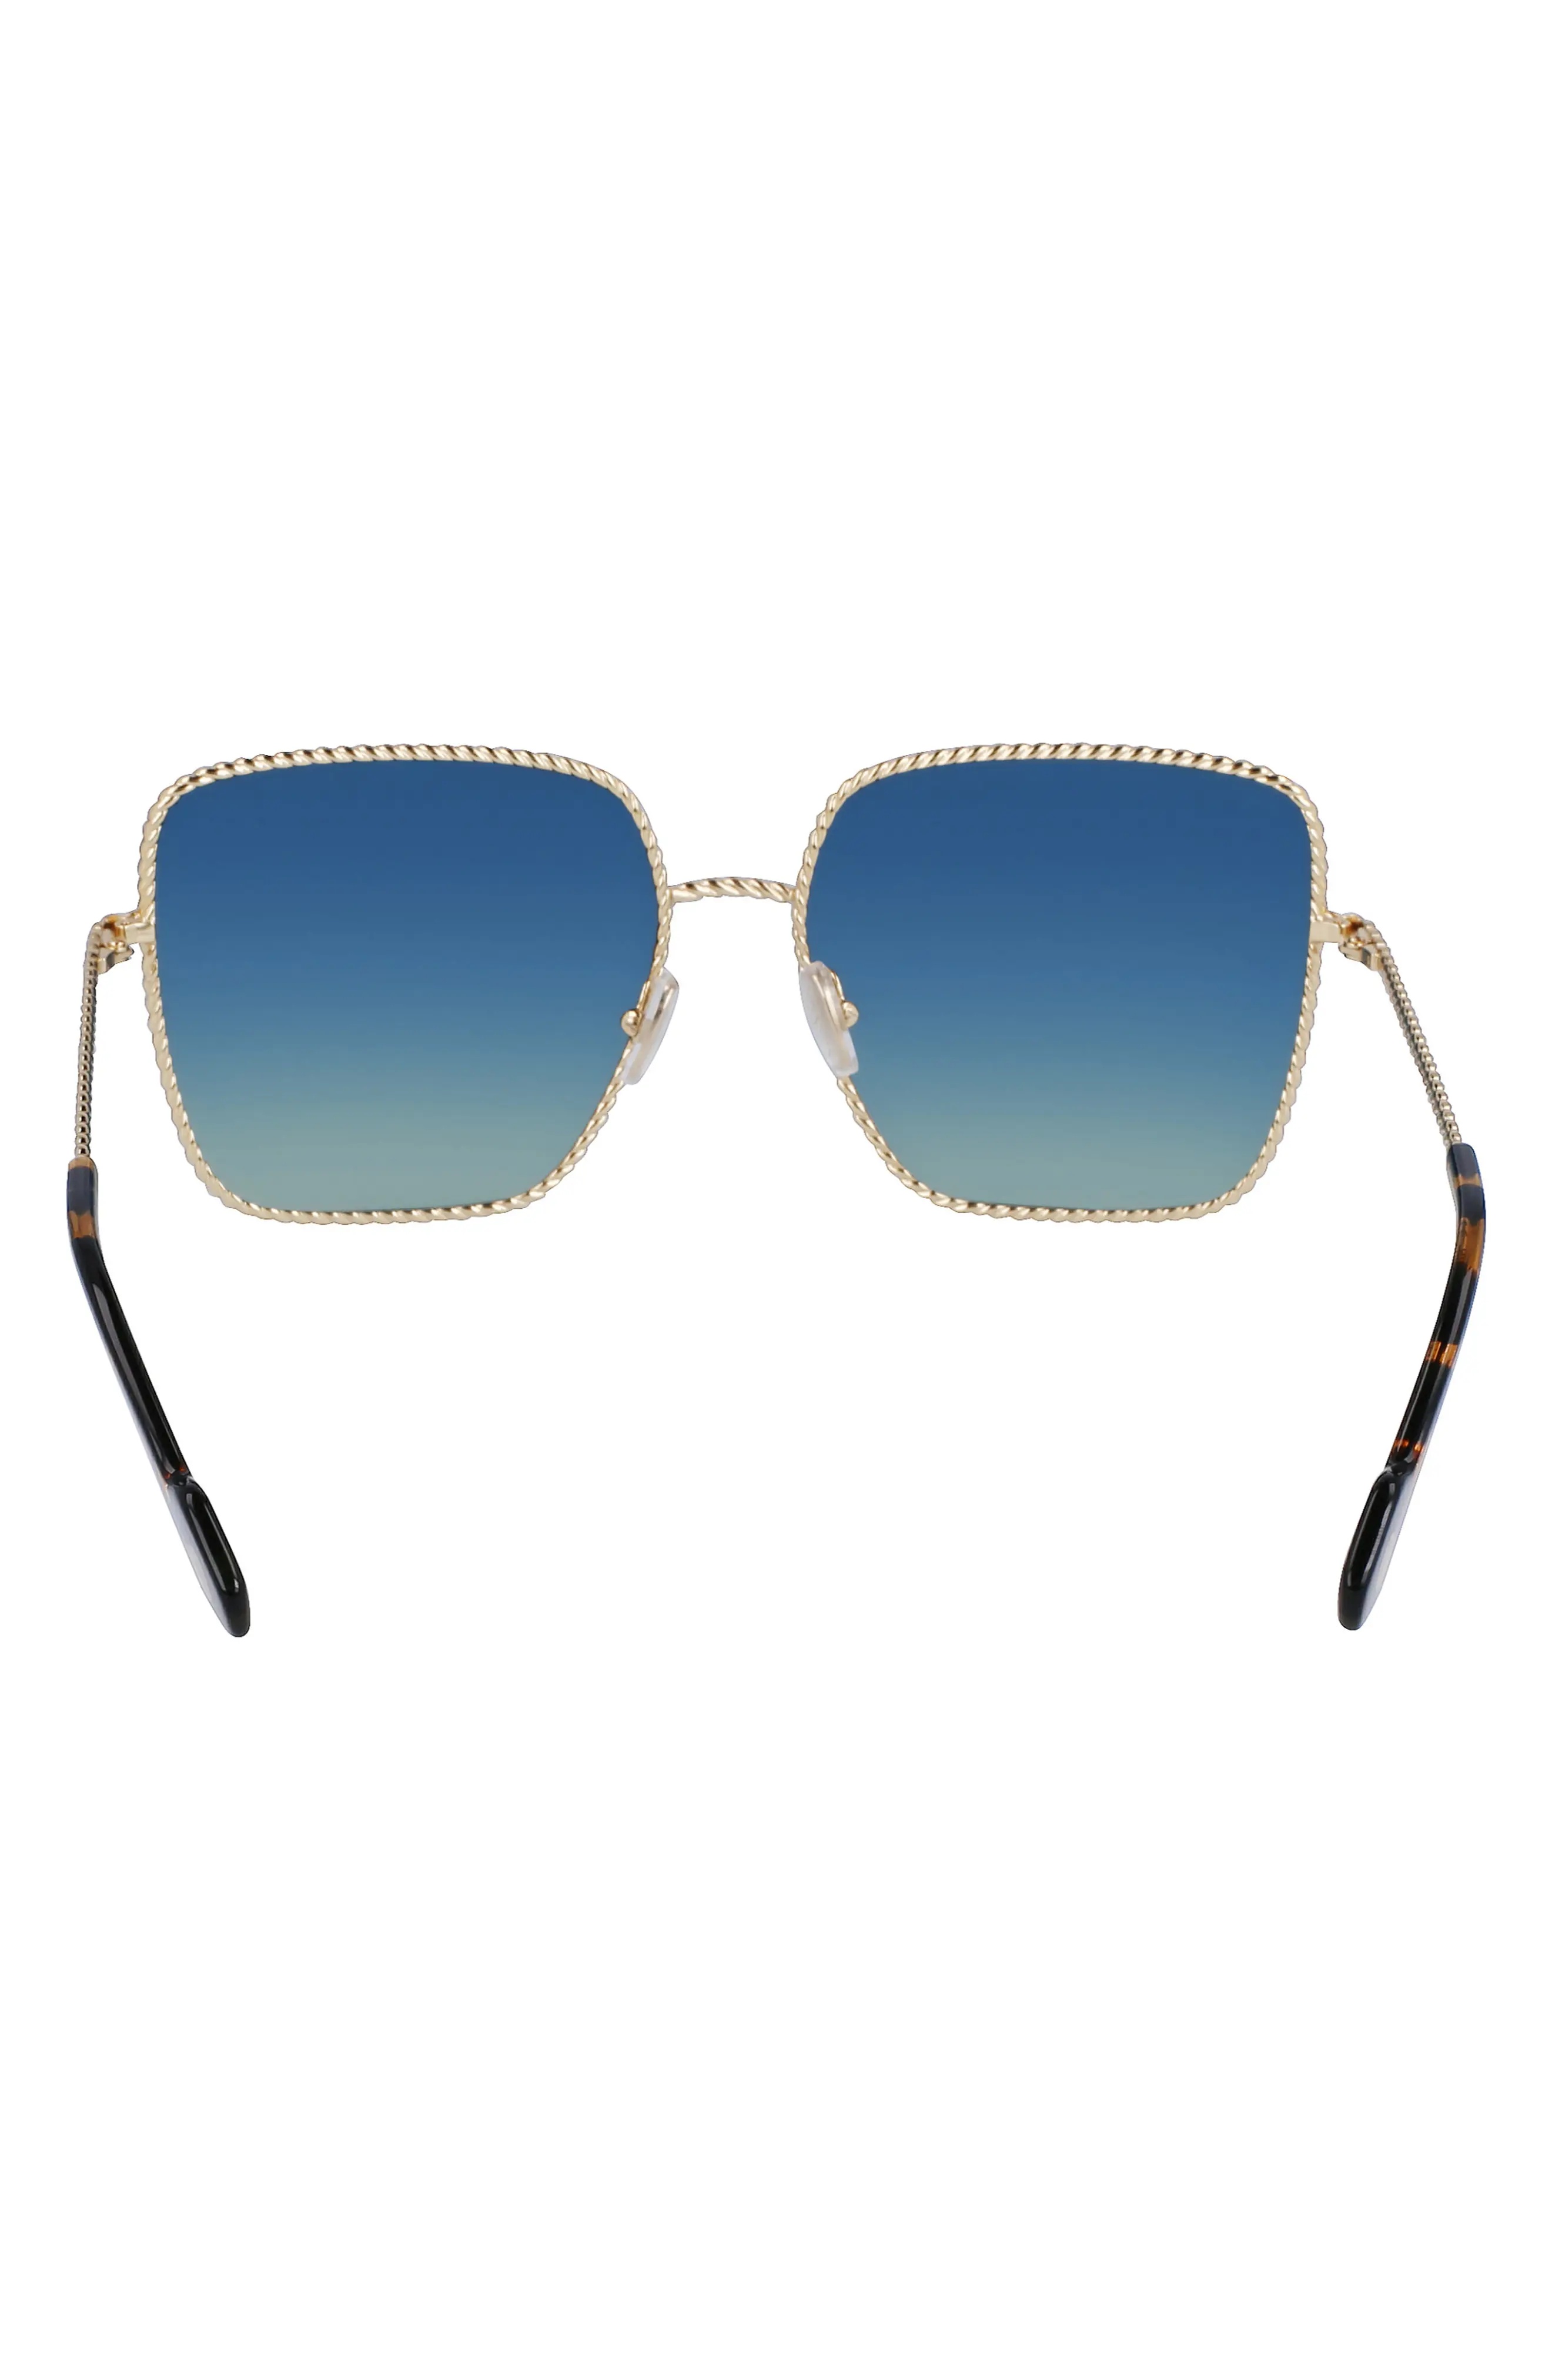 Babe 59mm Gradient Square Sunglasses in Gold/Gradient Blue Green - 5